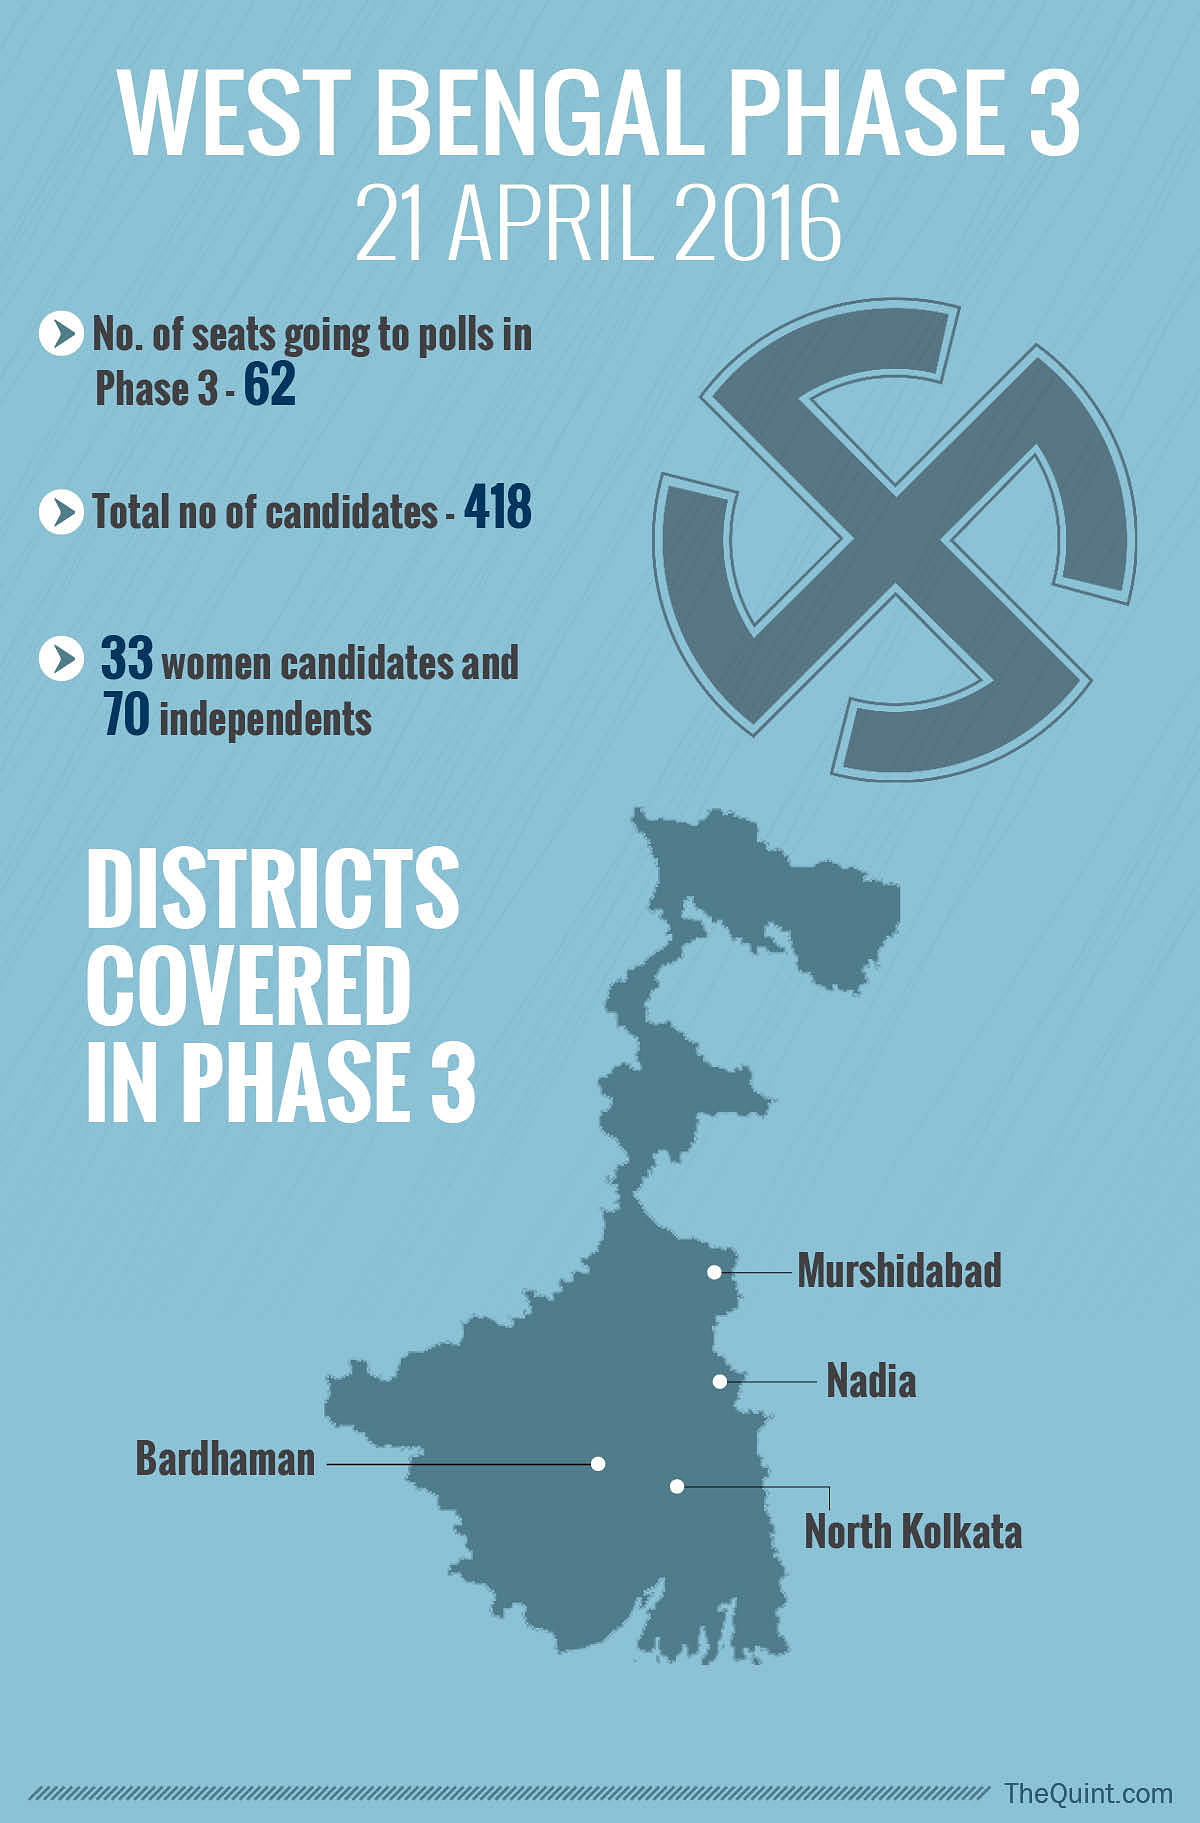 The Quint offers you a glimpse, in numbers, of what to expect from Phase 3 of polling in West Bengal.